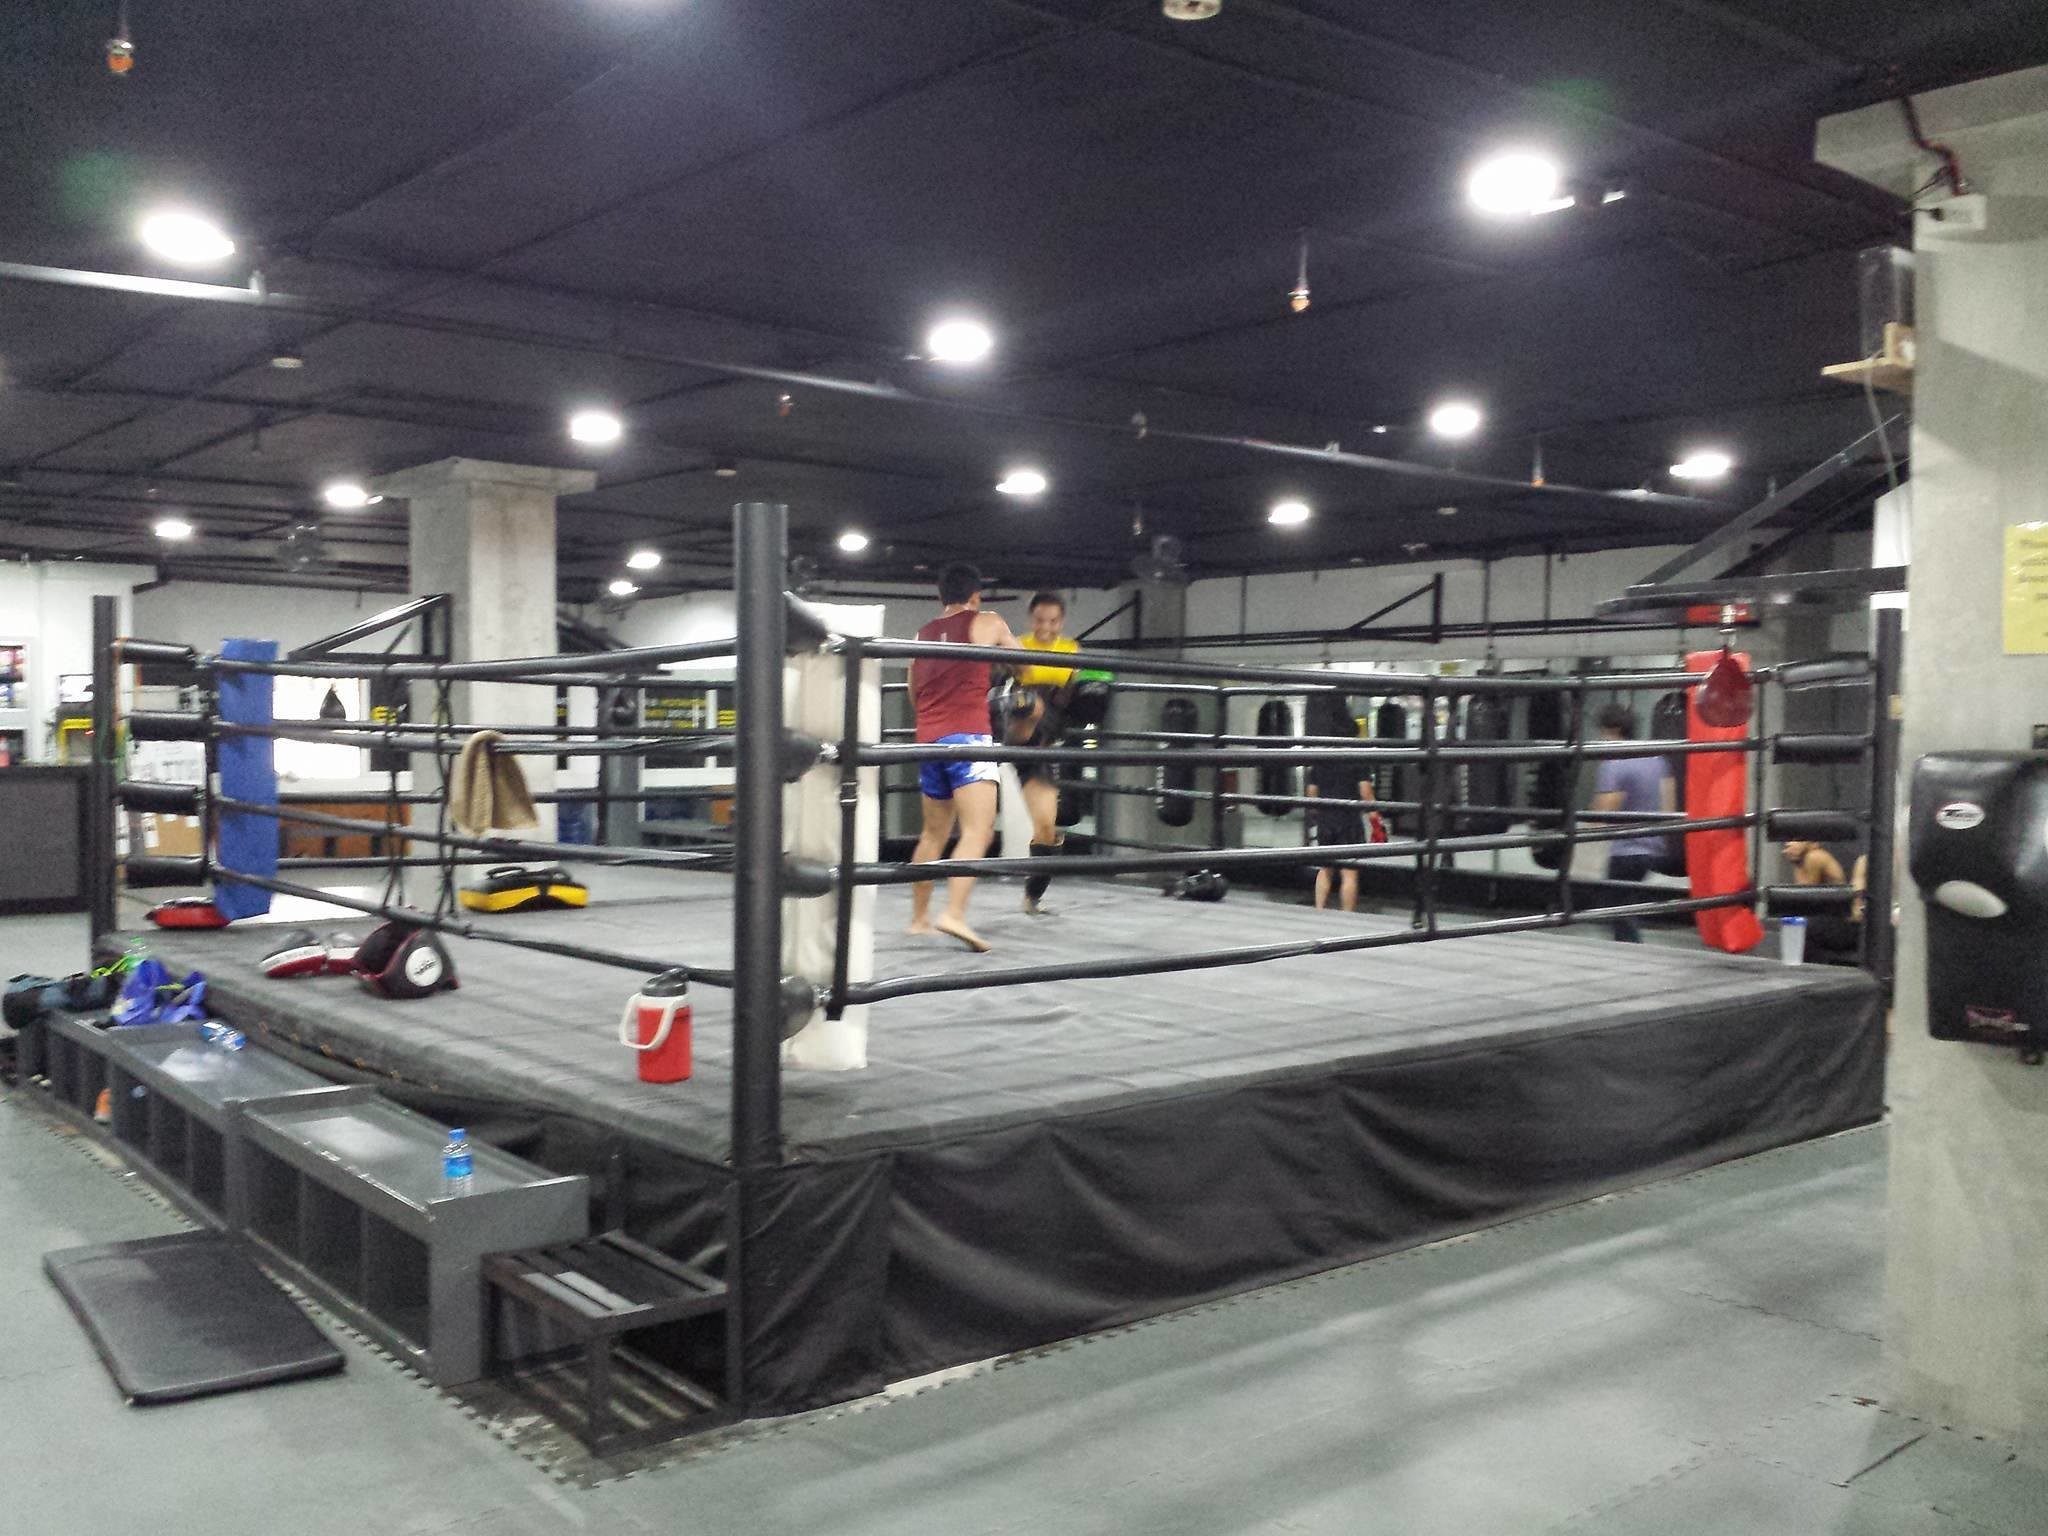 2048x1536 Muay Thai session with a student